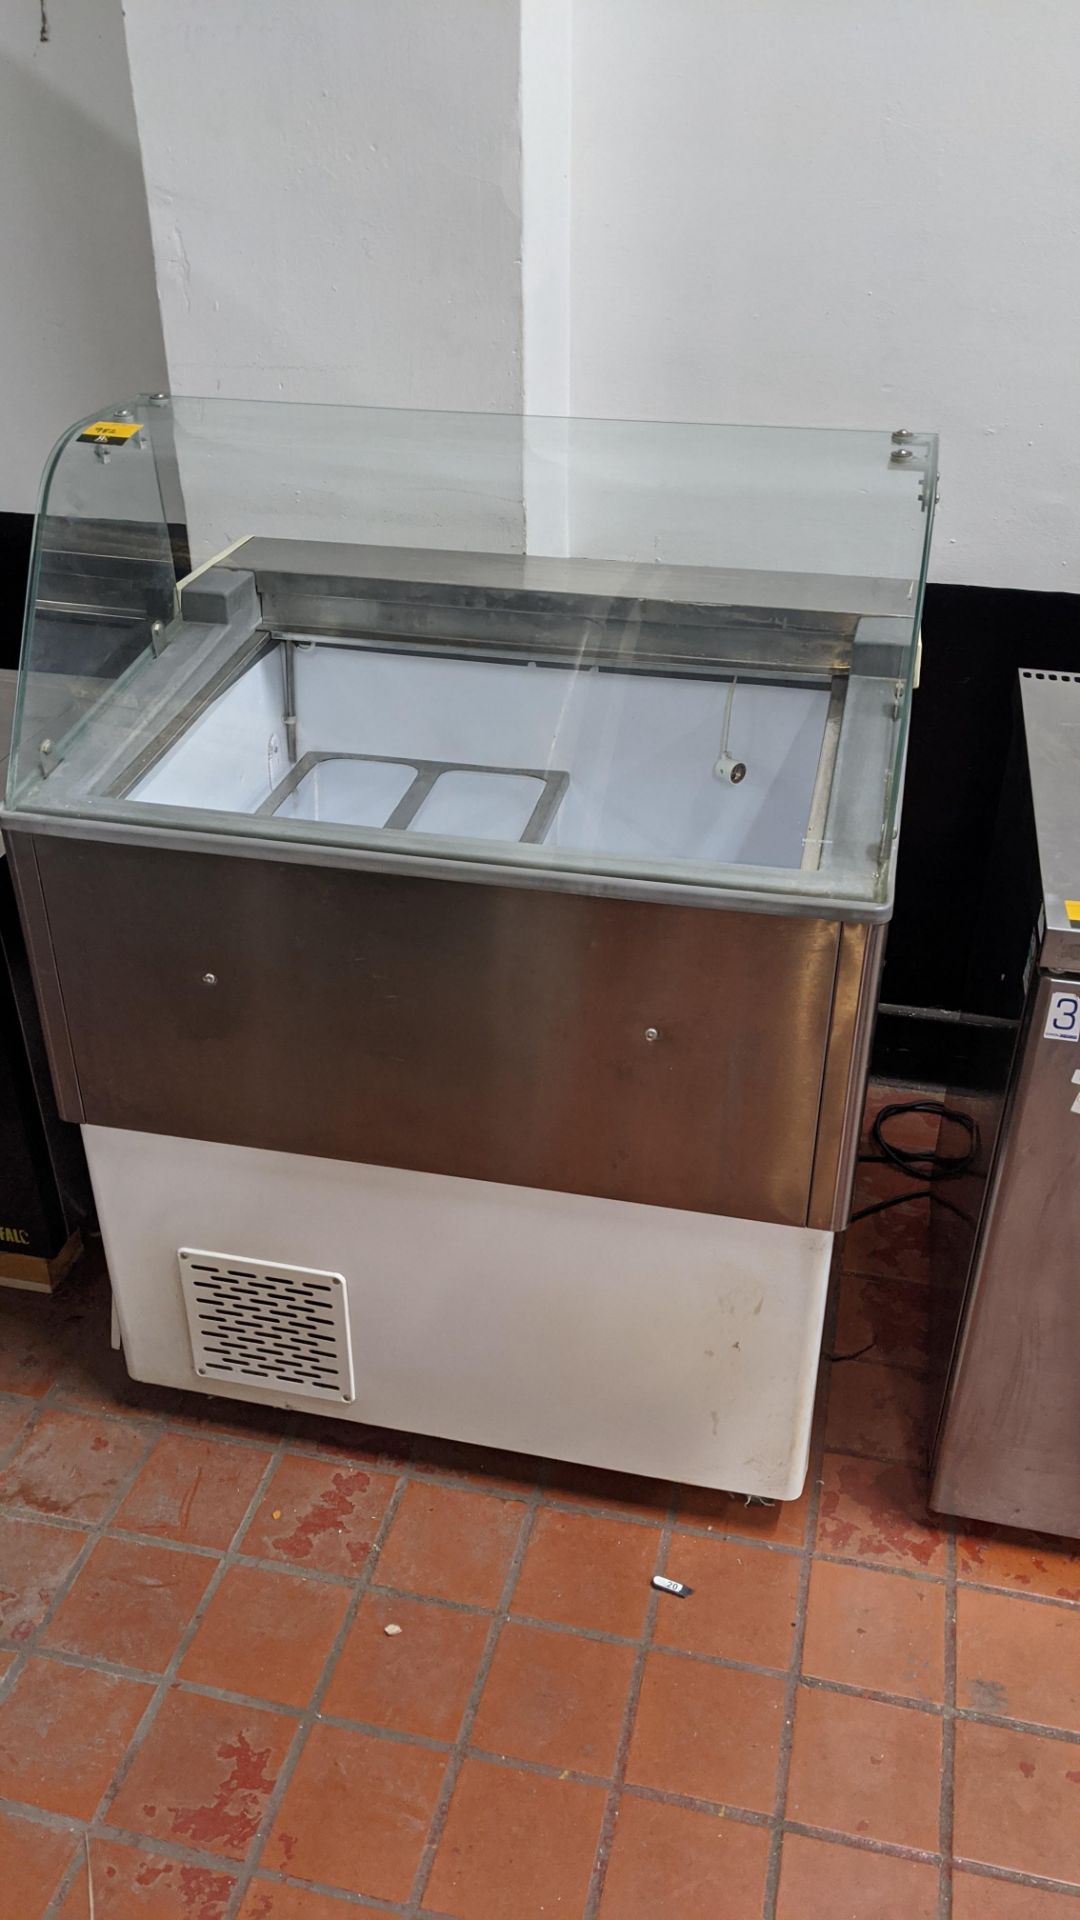 Ice cream retail serving counter - model 00129. IMPORTANT: Please remember goods successfully bid